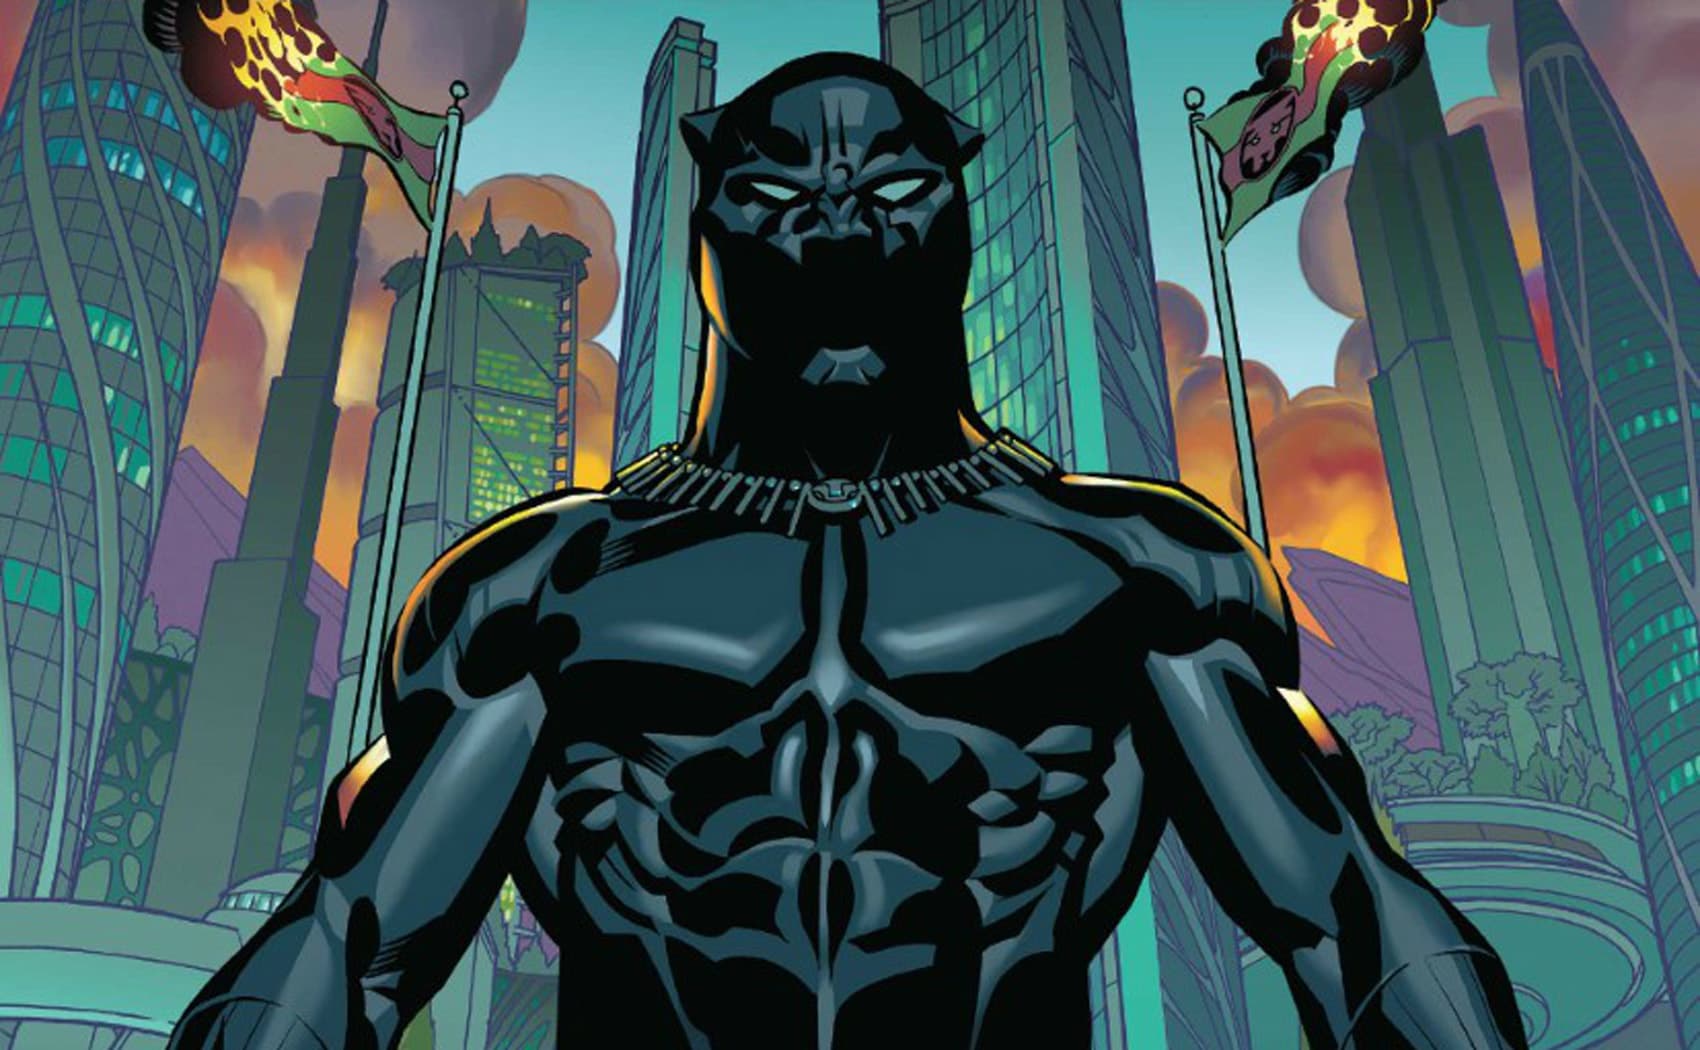 Comic books now feature more diverse superheroes, writes John Vercher, unlike most cartoons and merchandise. Pictured: The cover of &quot;Black Panther: A Nation Under Our Feet, Book 1,&quot; written by author Ta-Nehisi Coates, winner of the National Book Award. (Courtesy of Marvel)